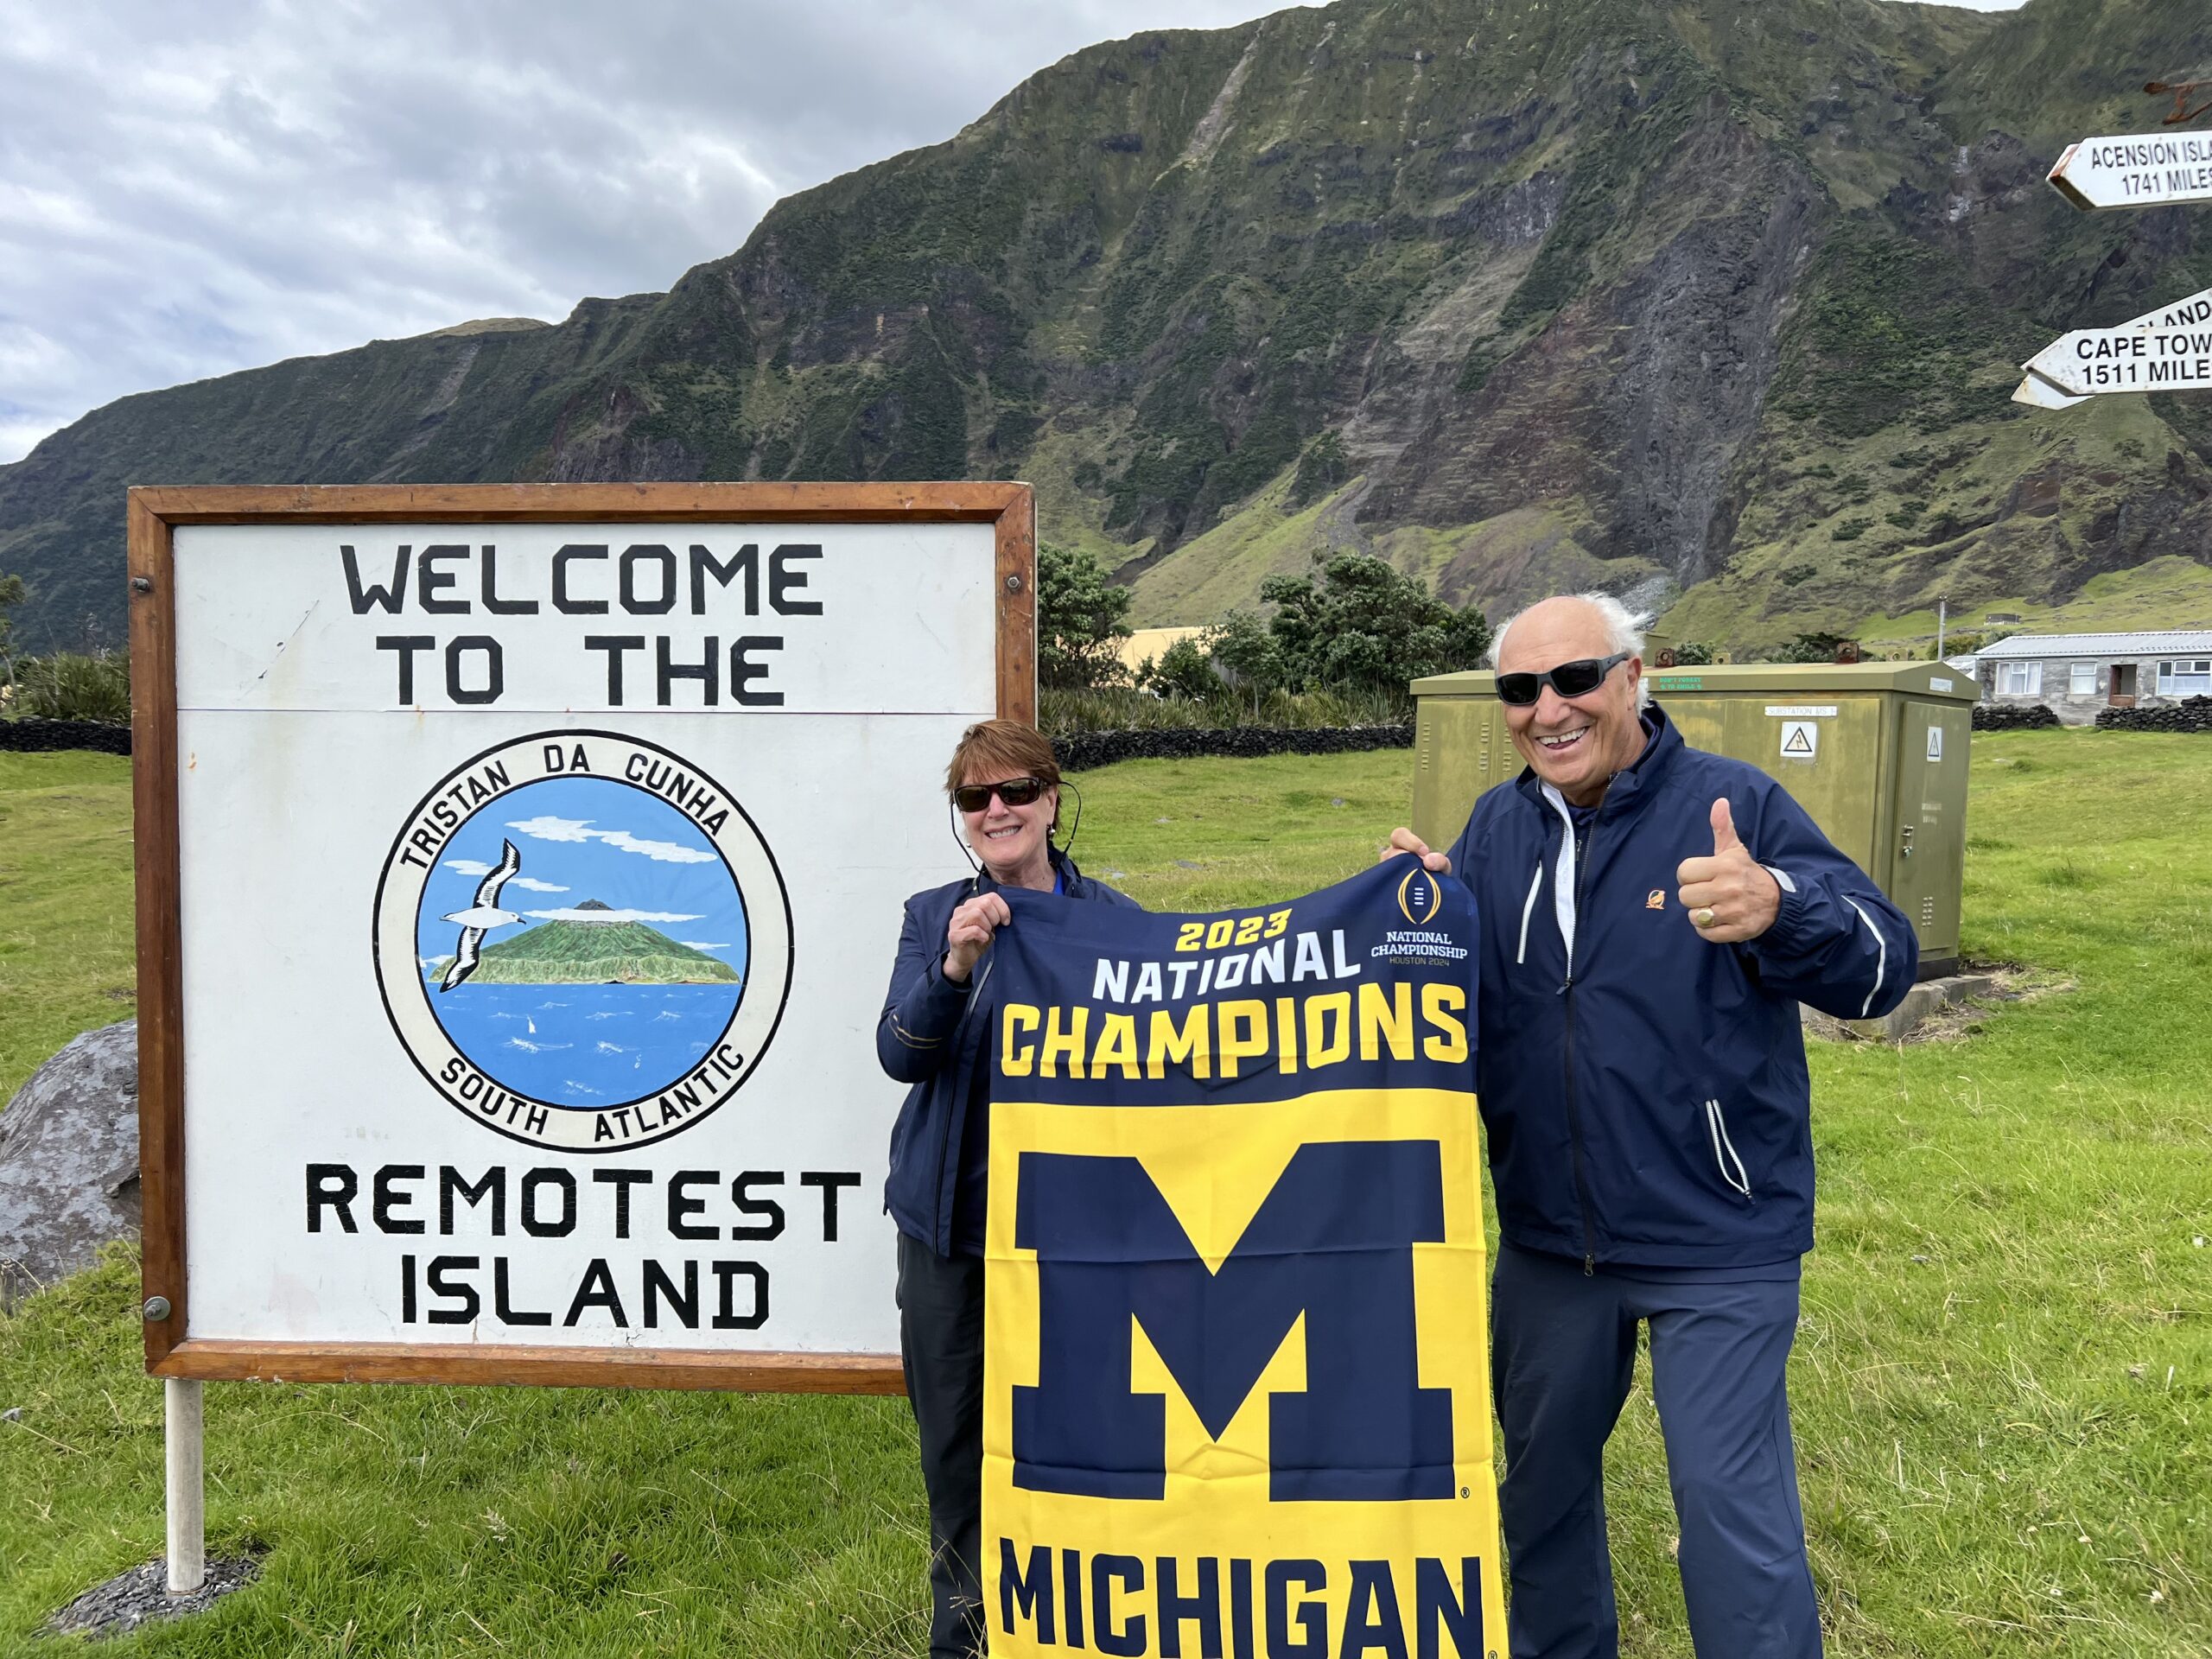 Eileen Weiser, MMUS’75, and Dick Caldarazzo, ’70, celebrate U-M’s football success from the “Remotest Island” of Tristan da Cunha in the middle of the Atlantic Ocean.